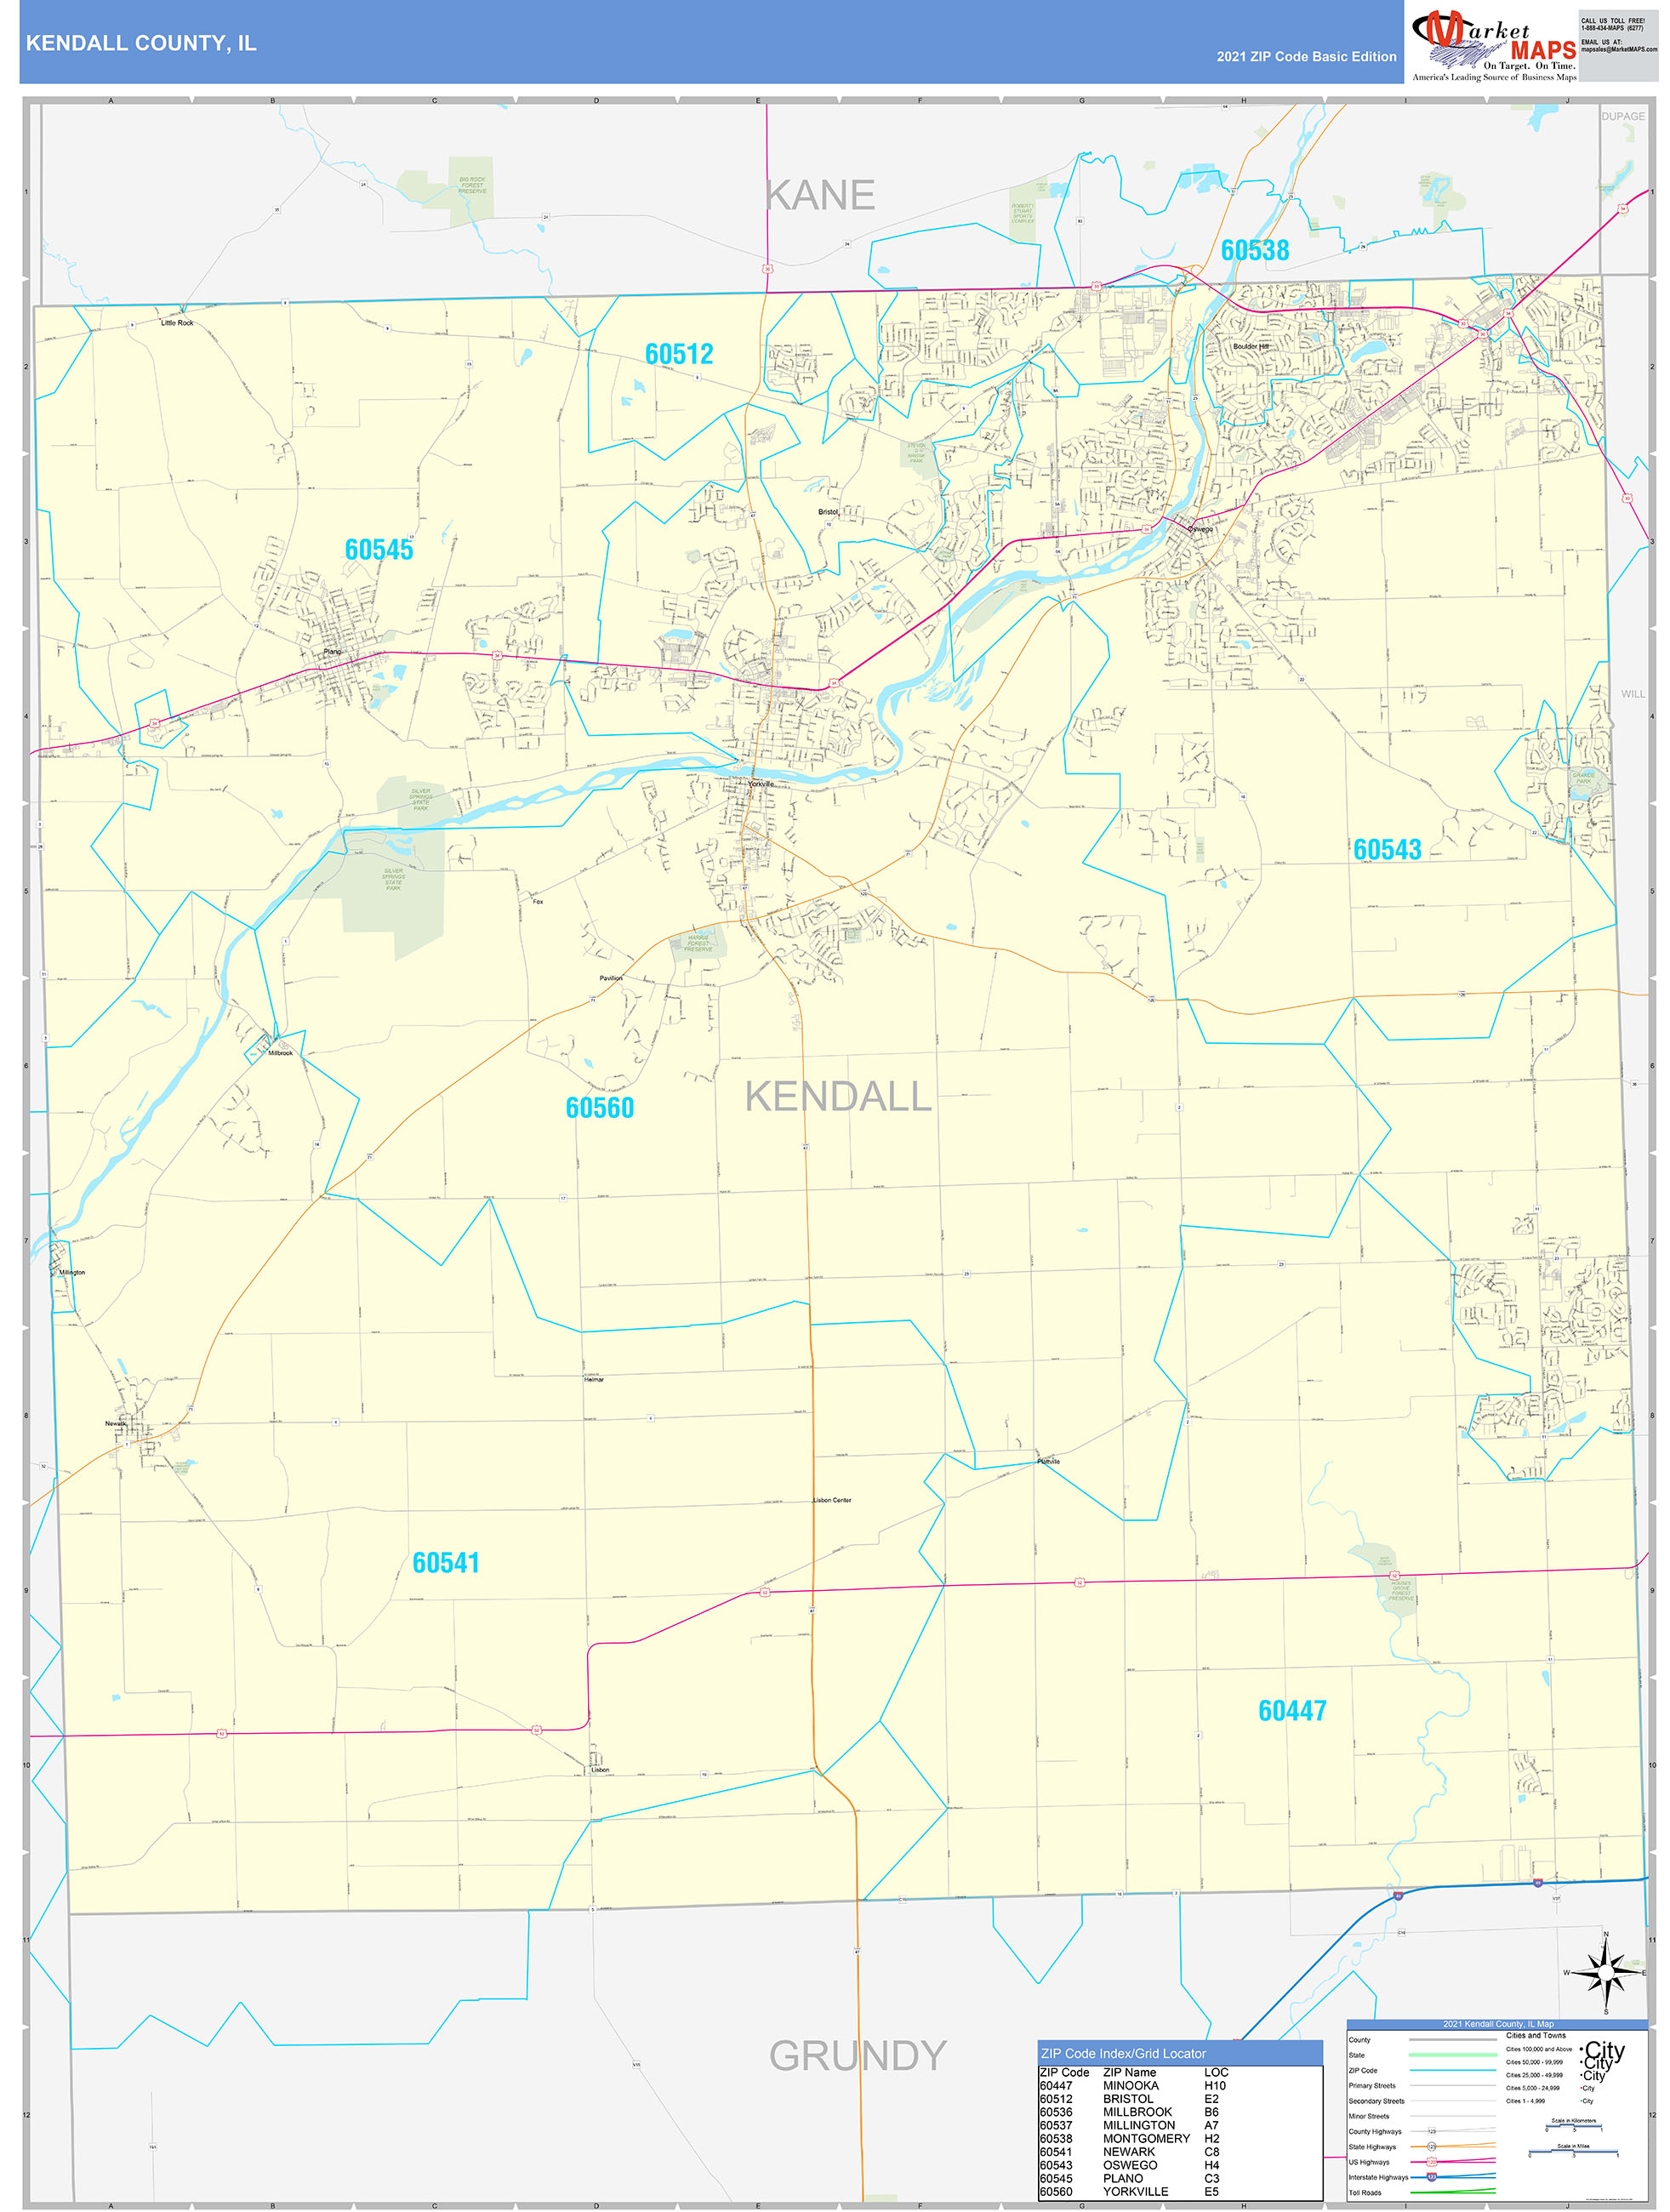 kendall-county-il-zip-code-wall-map-basic-style-by-marketmaps-mapsales